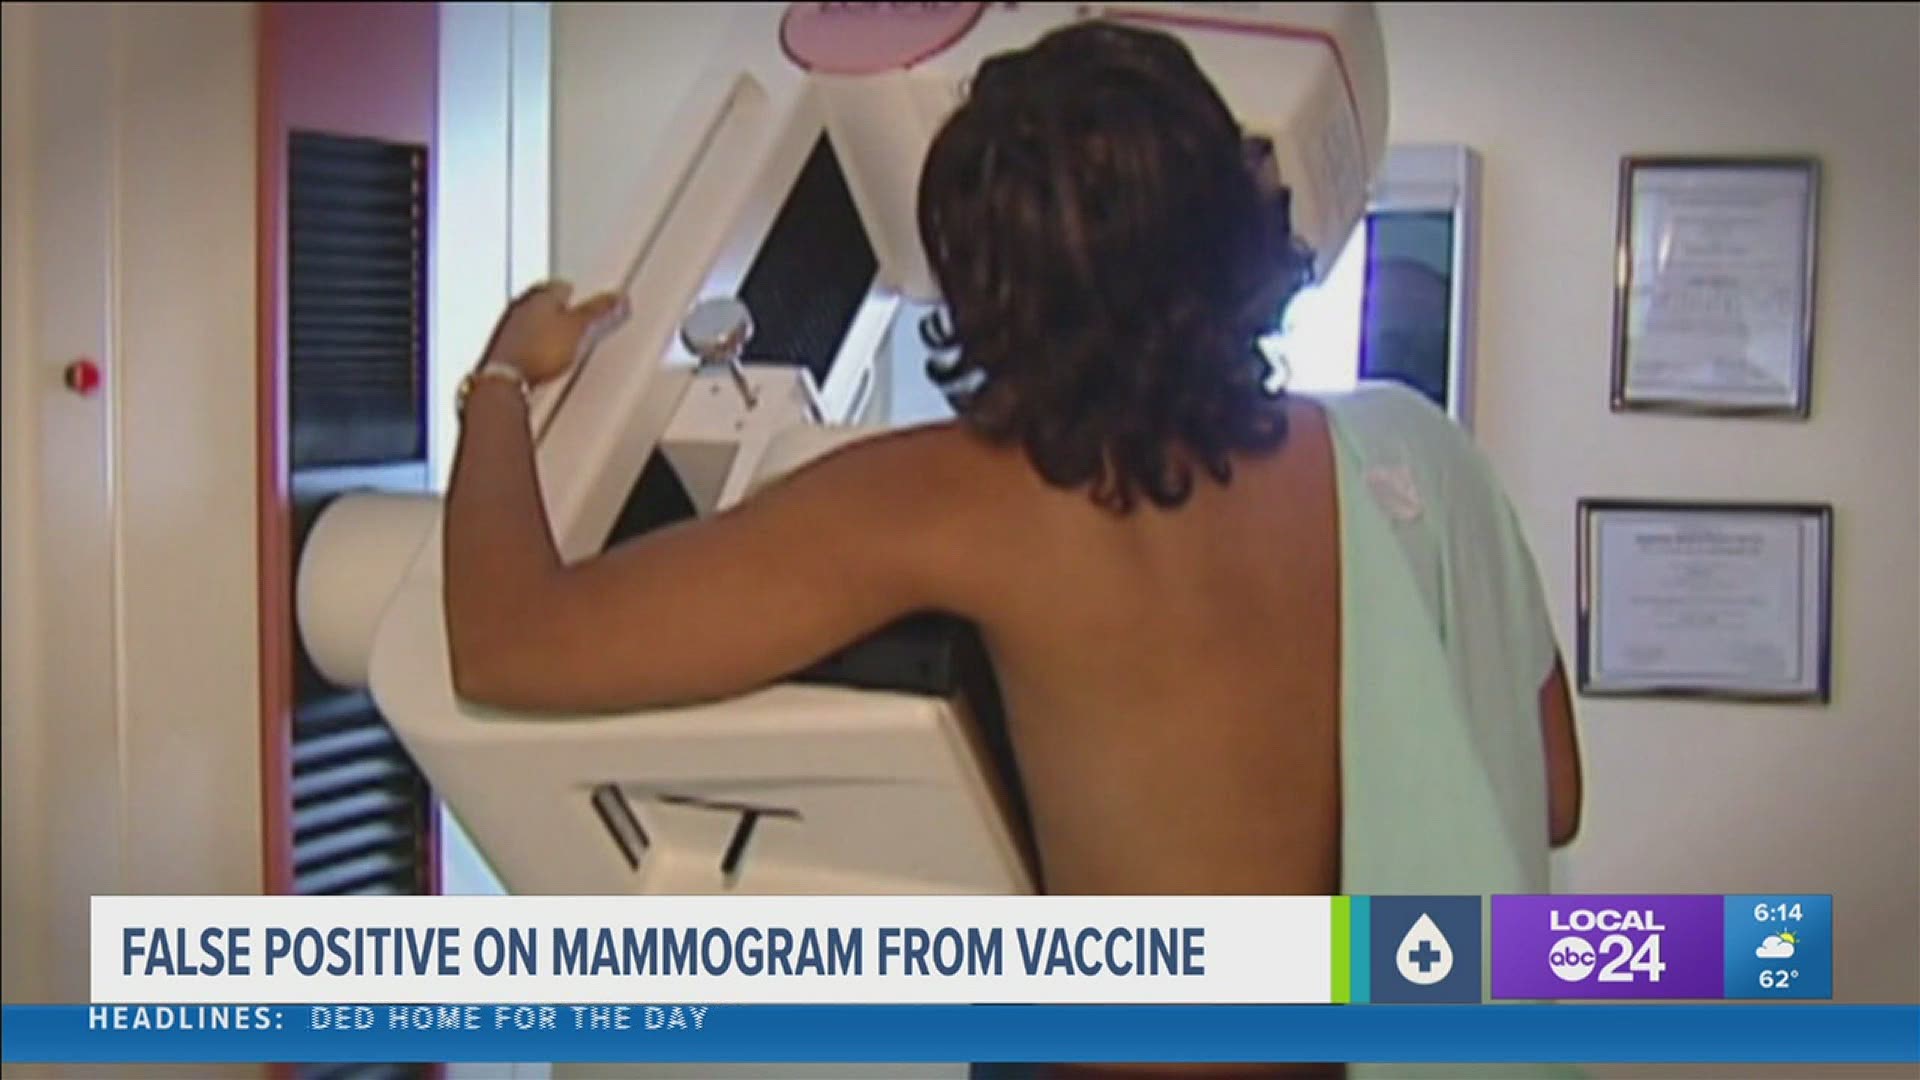 If you have a mammogram scheduled too close to when you received your second dose of the shot, you run the risk of receiving a “false positive.”